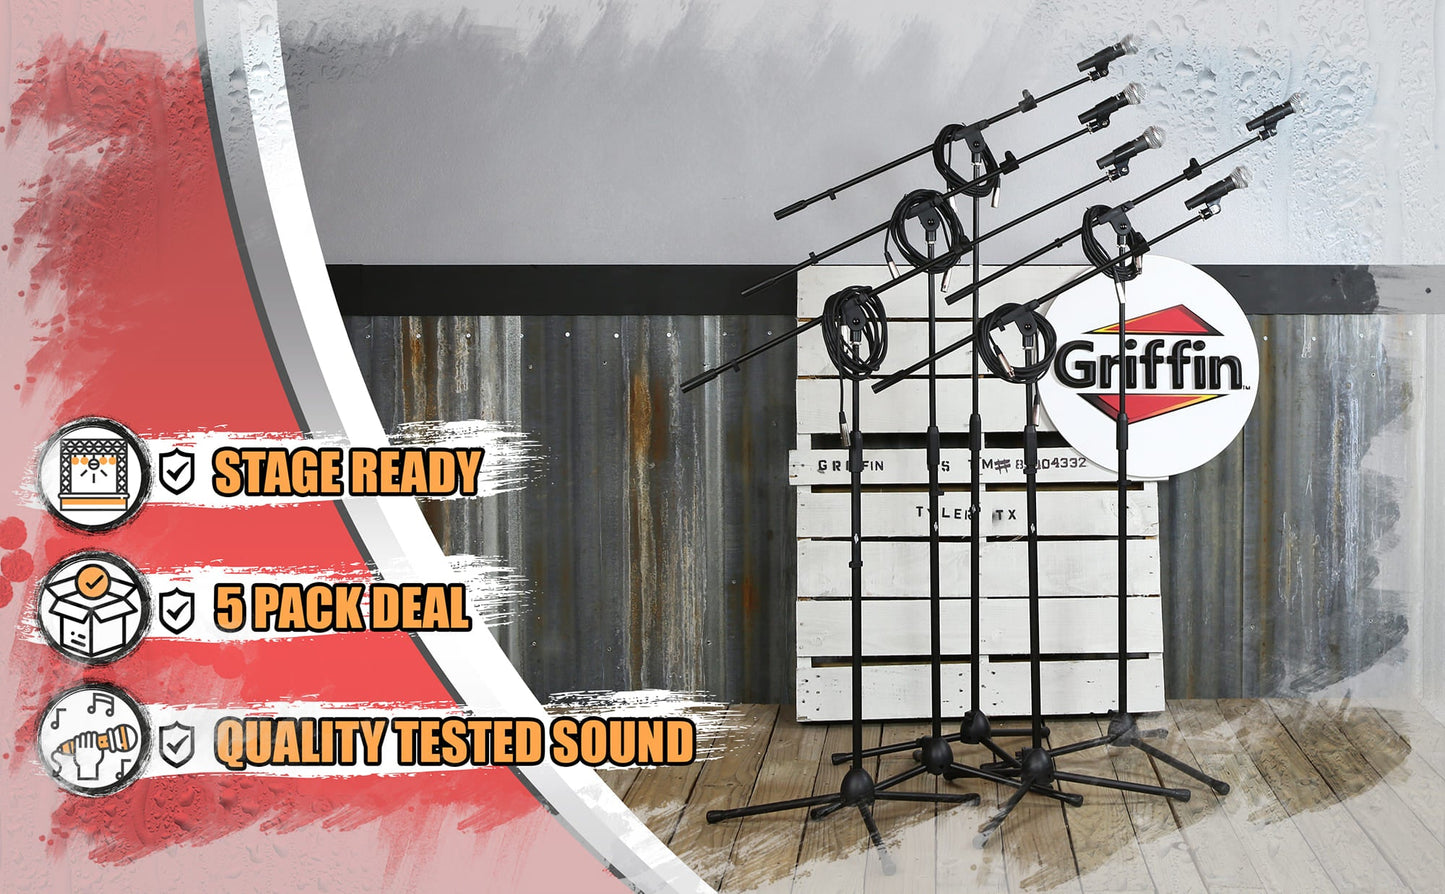 GRIFFIN Microphone Stand Package of 5 with Vocal Unidirectional Mics & XLR Cables - Handheld Cardioid Dynamic Microphones for Home Studio Recording